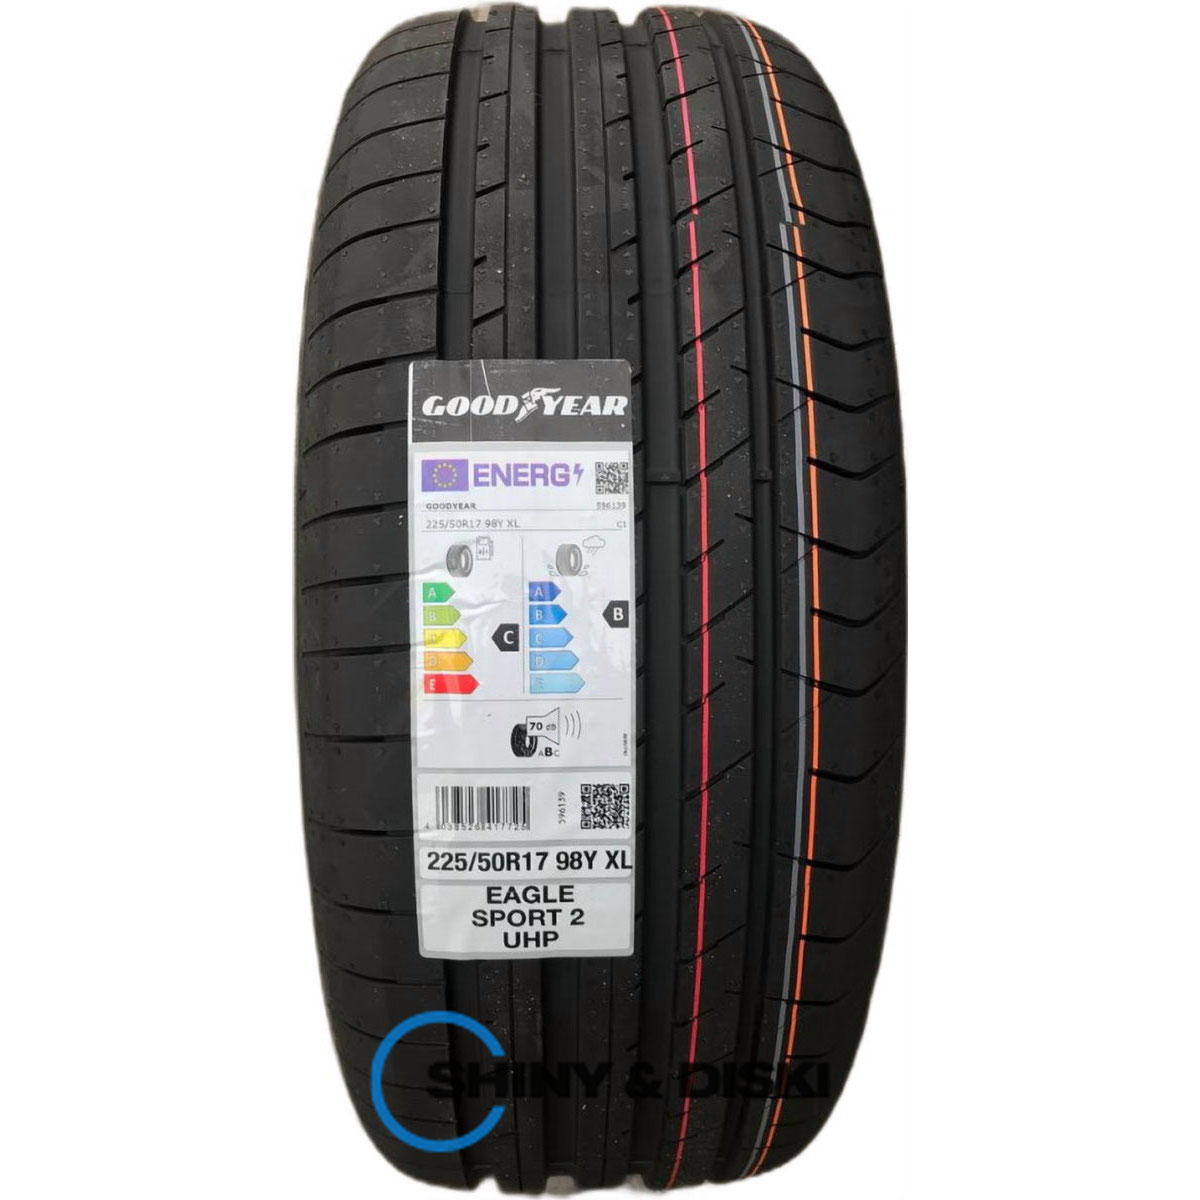 покришки goodyear eagle sport 2 uhp 245/45 r17 99y xl fp